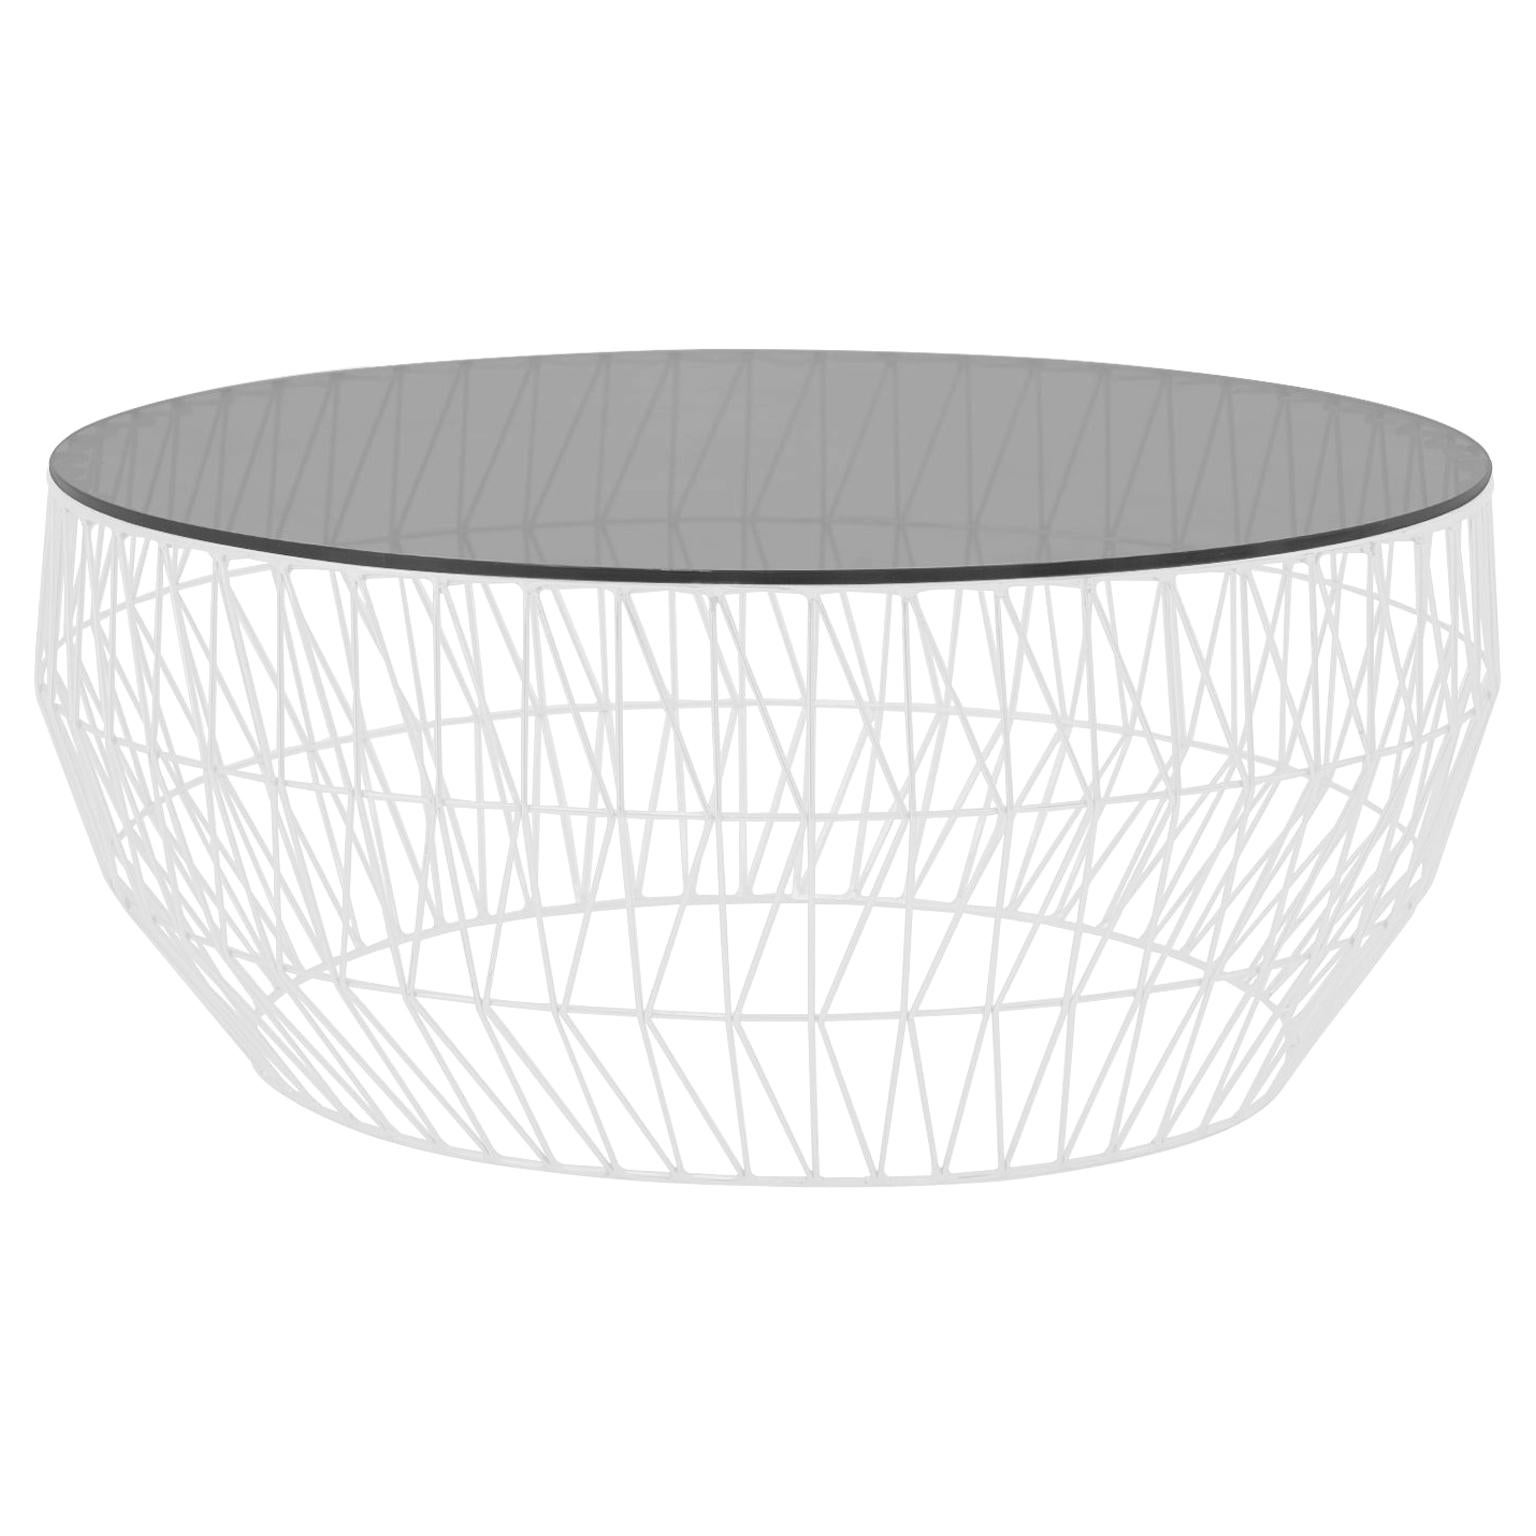 Minimalist Coffee Table, Wire Center Table in White with Smoked Glass